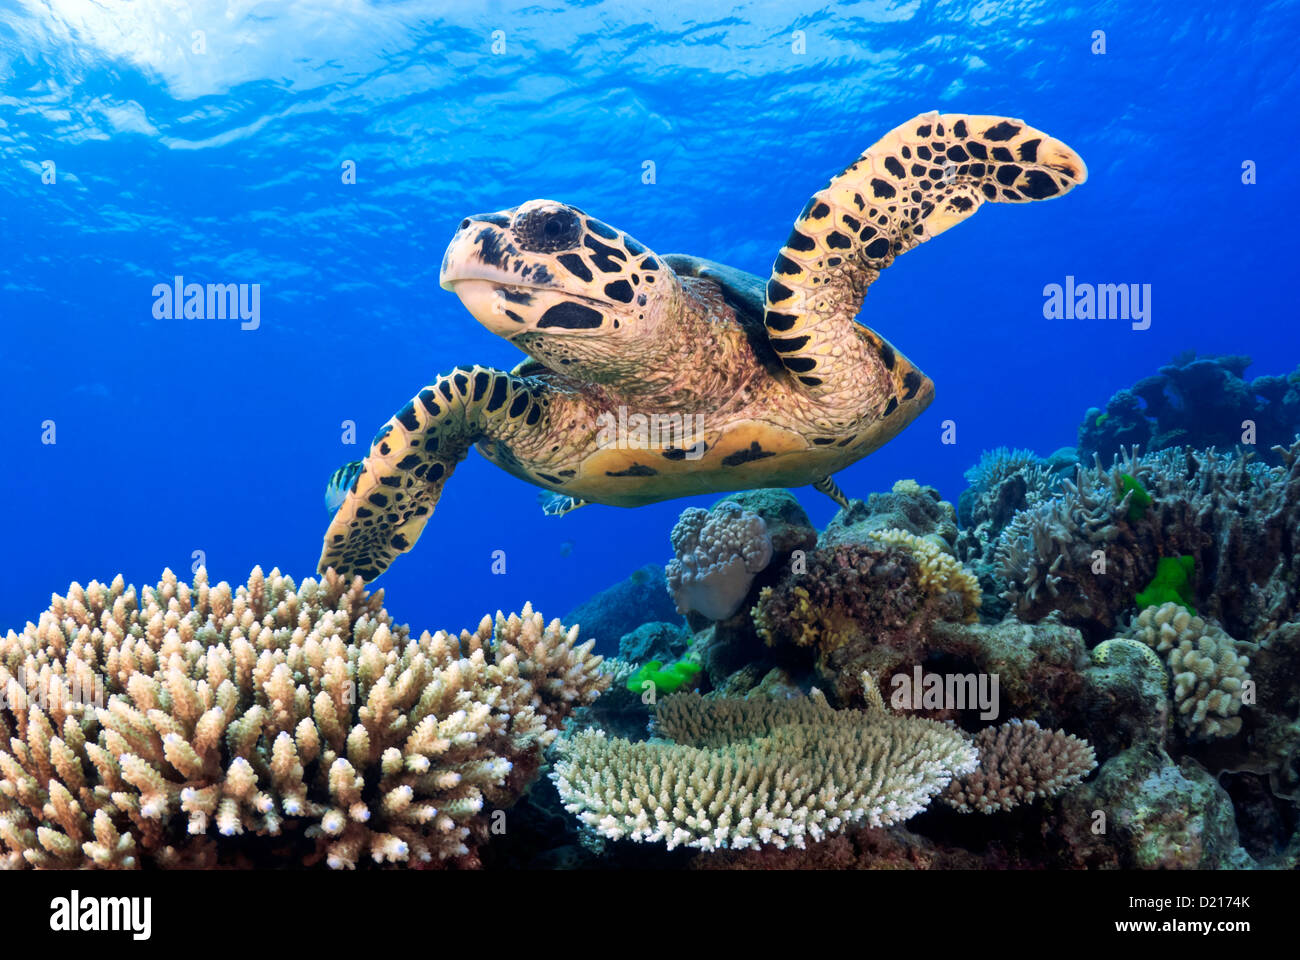 Hawksbill Sea Turtle Eretmochelys imbricata swimming over a Coral Reef, Great Barrier Reef, Coral Sea, Queensland, Australia Stock Photo